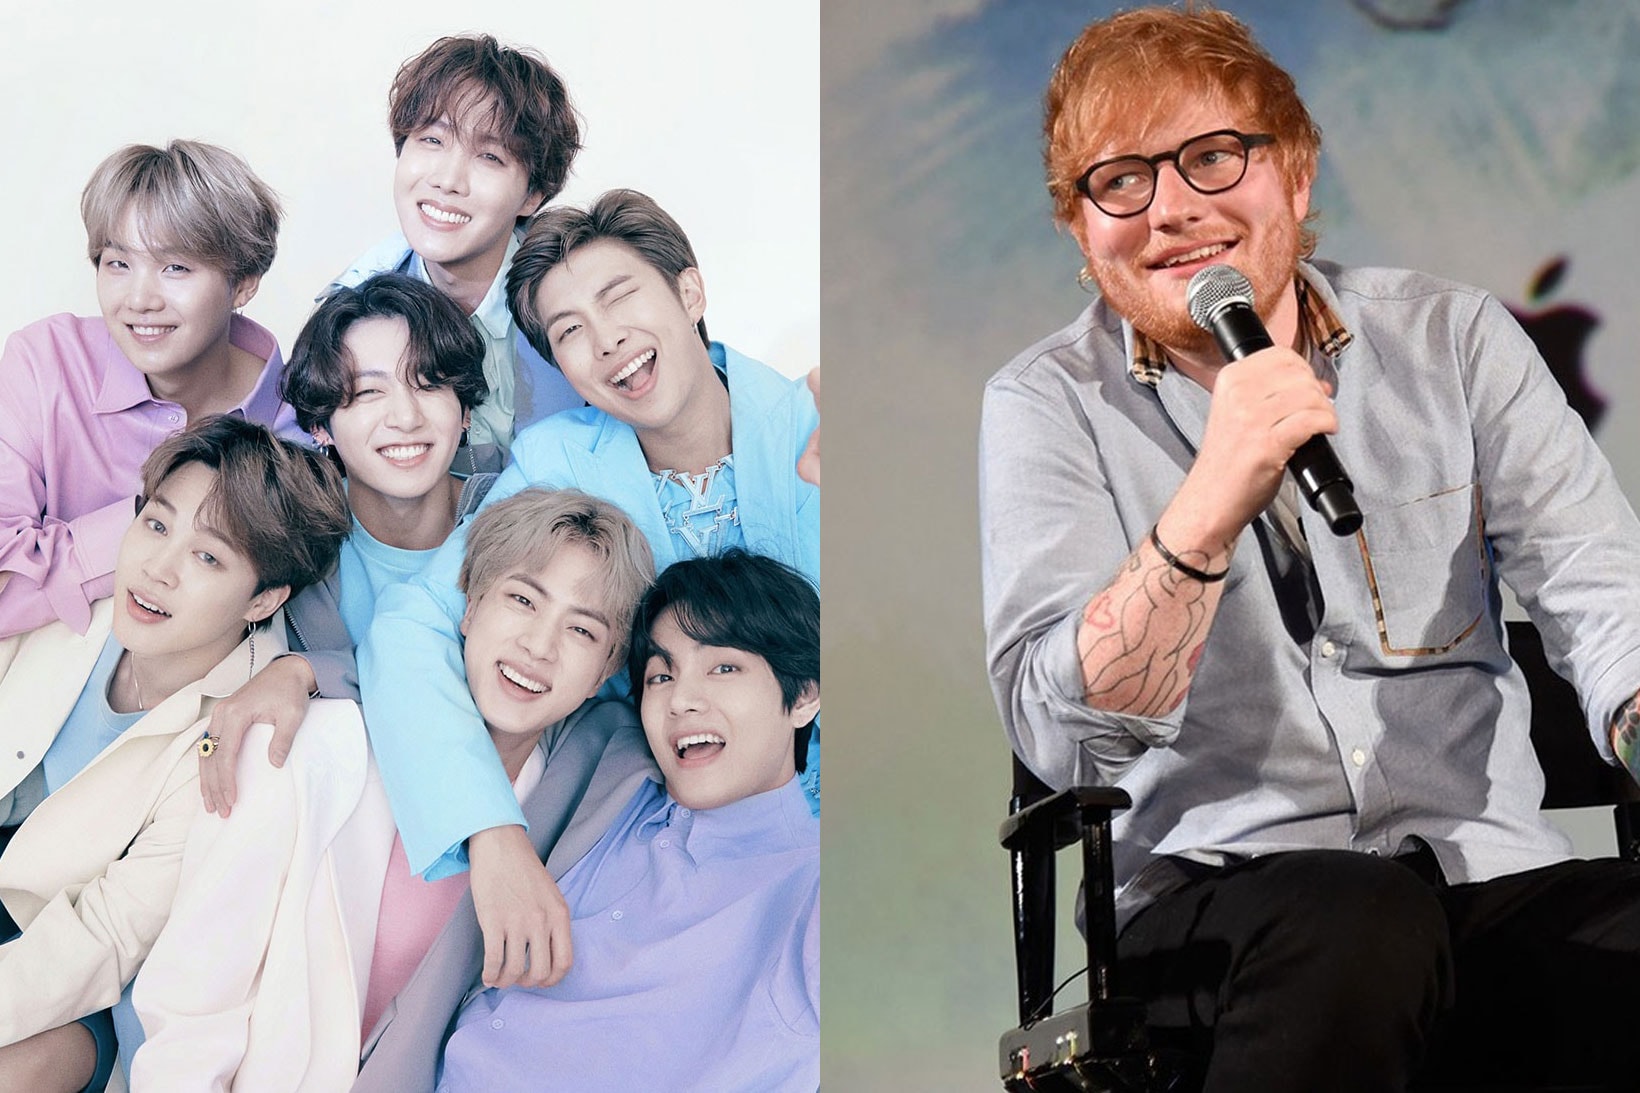 bts ed sheeran songwriter spoiler announcement track title permission to dance info 